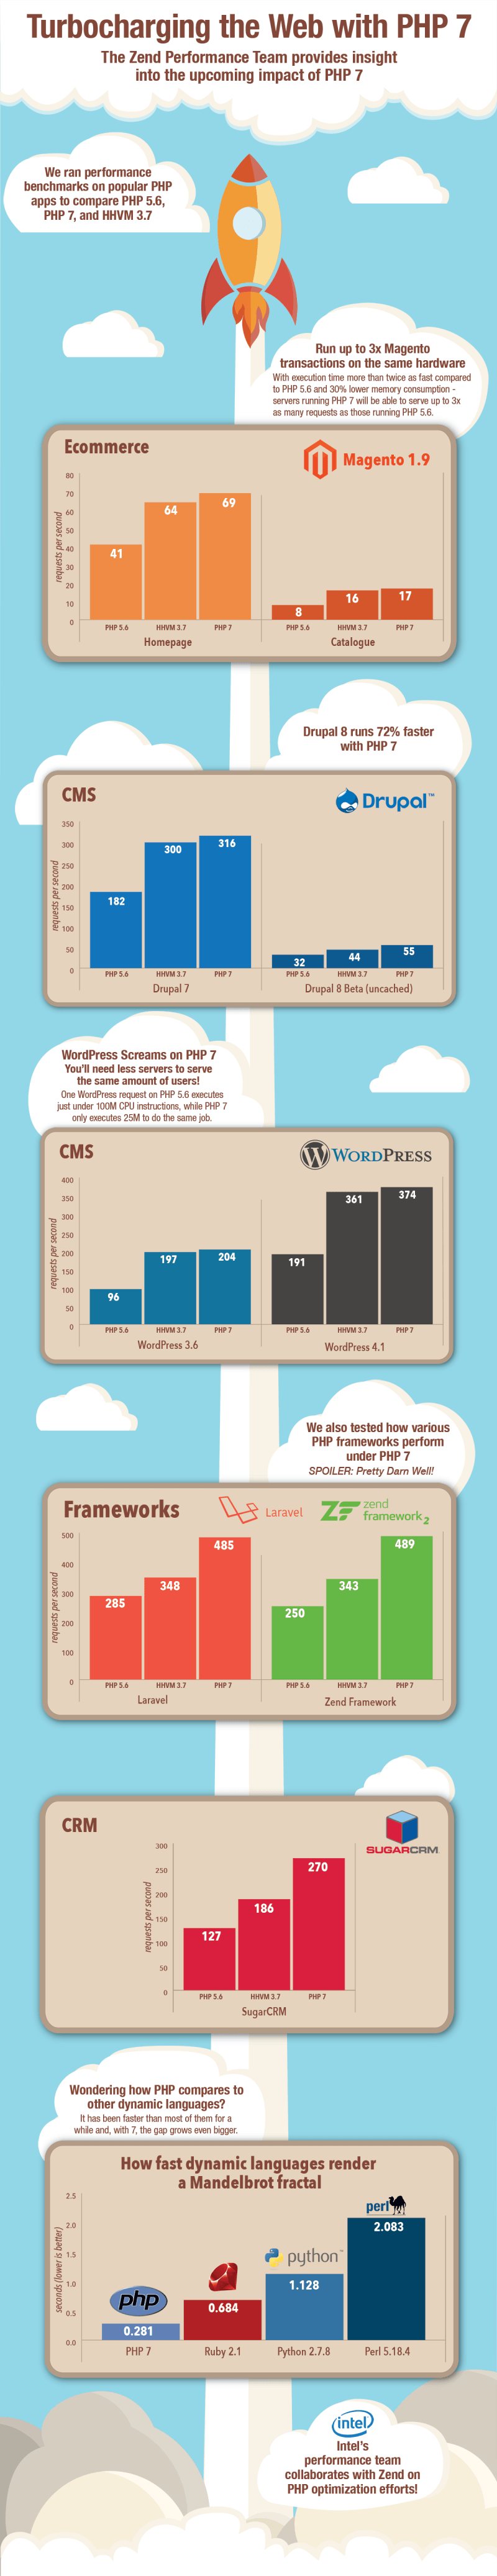 php7 performance comparison infographic